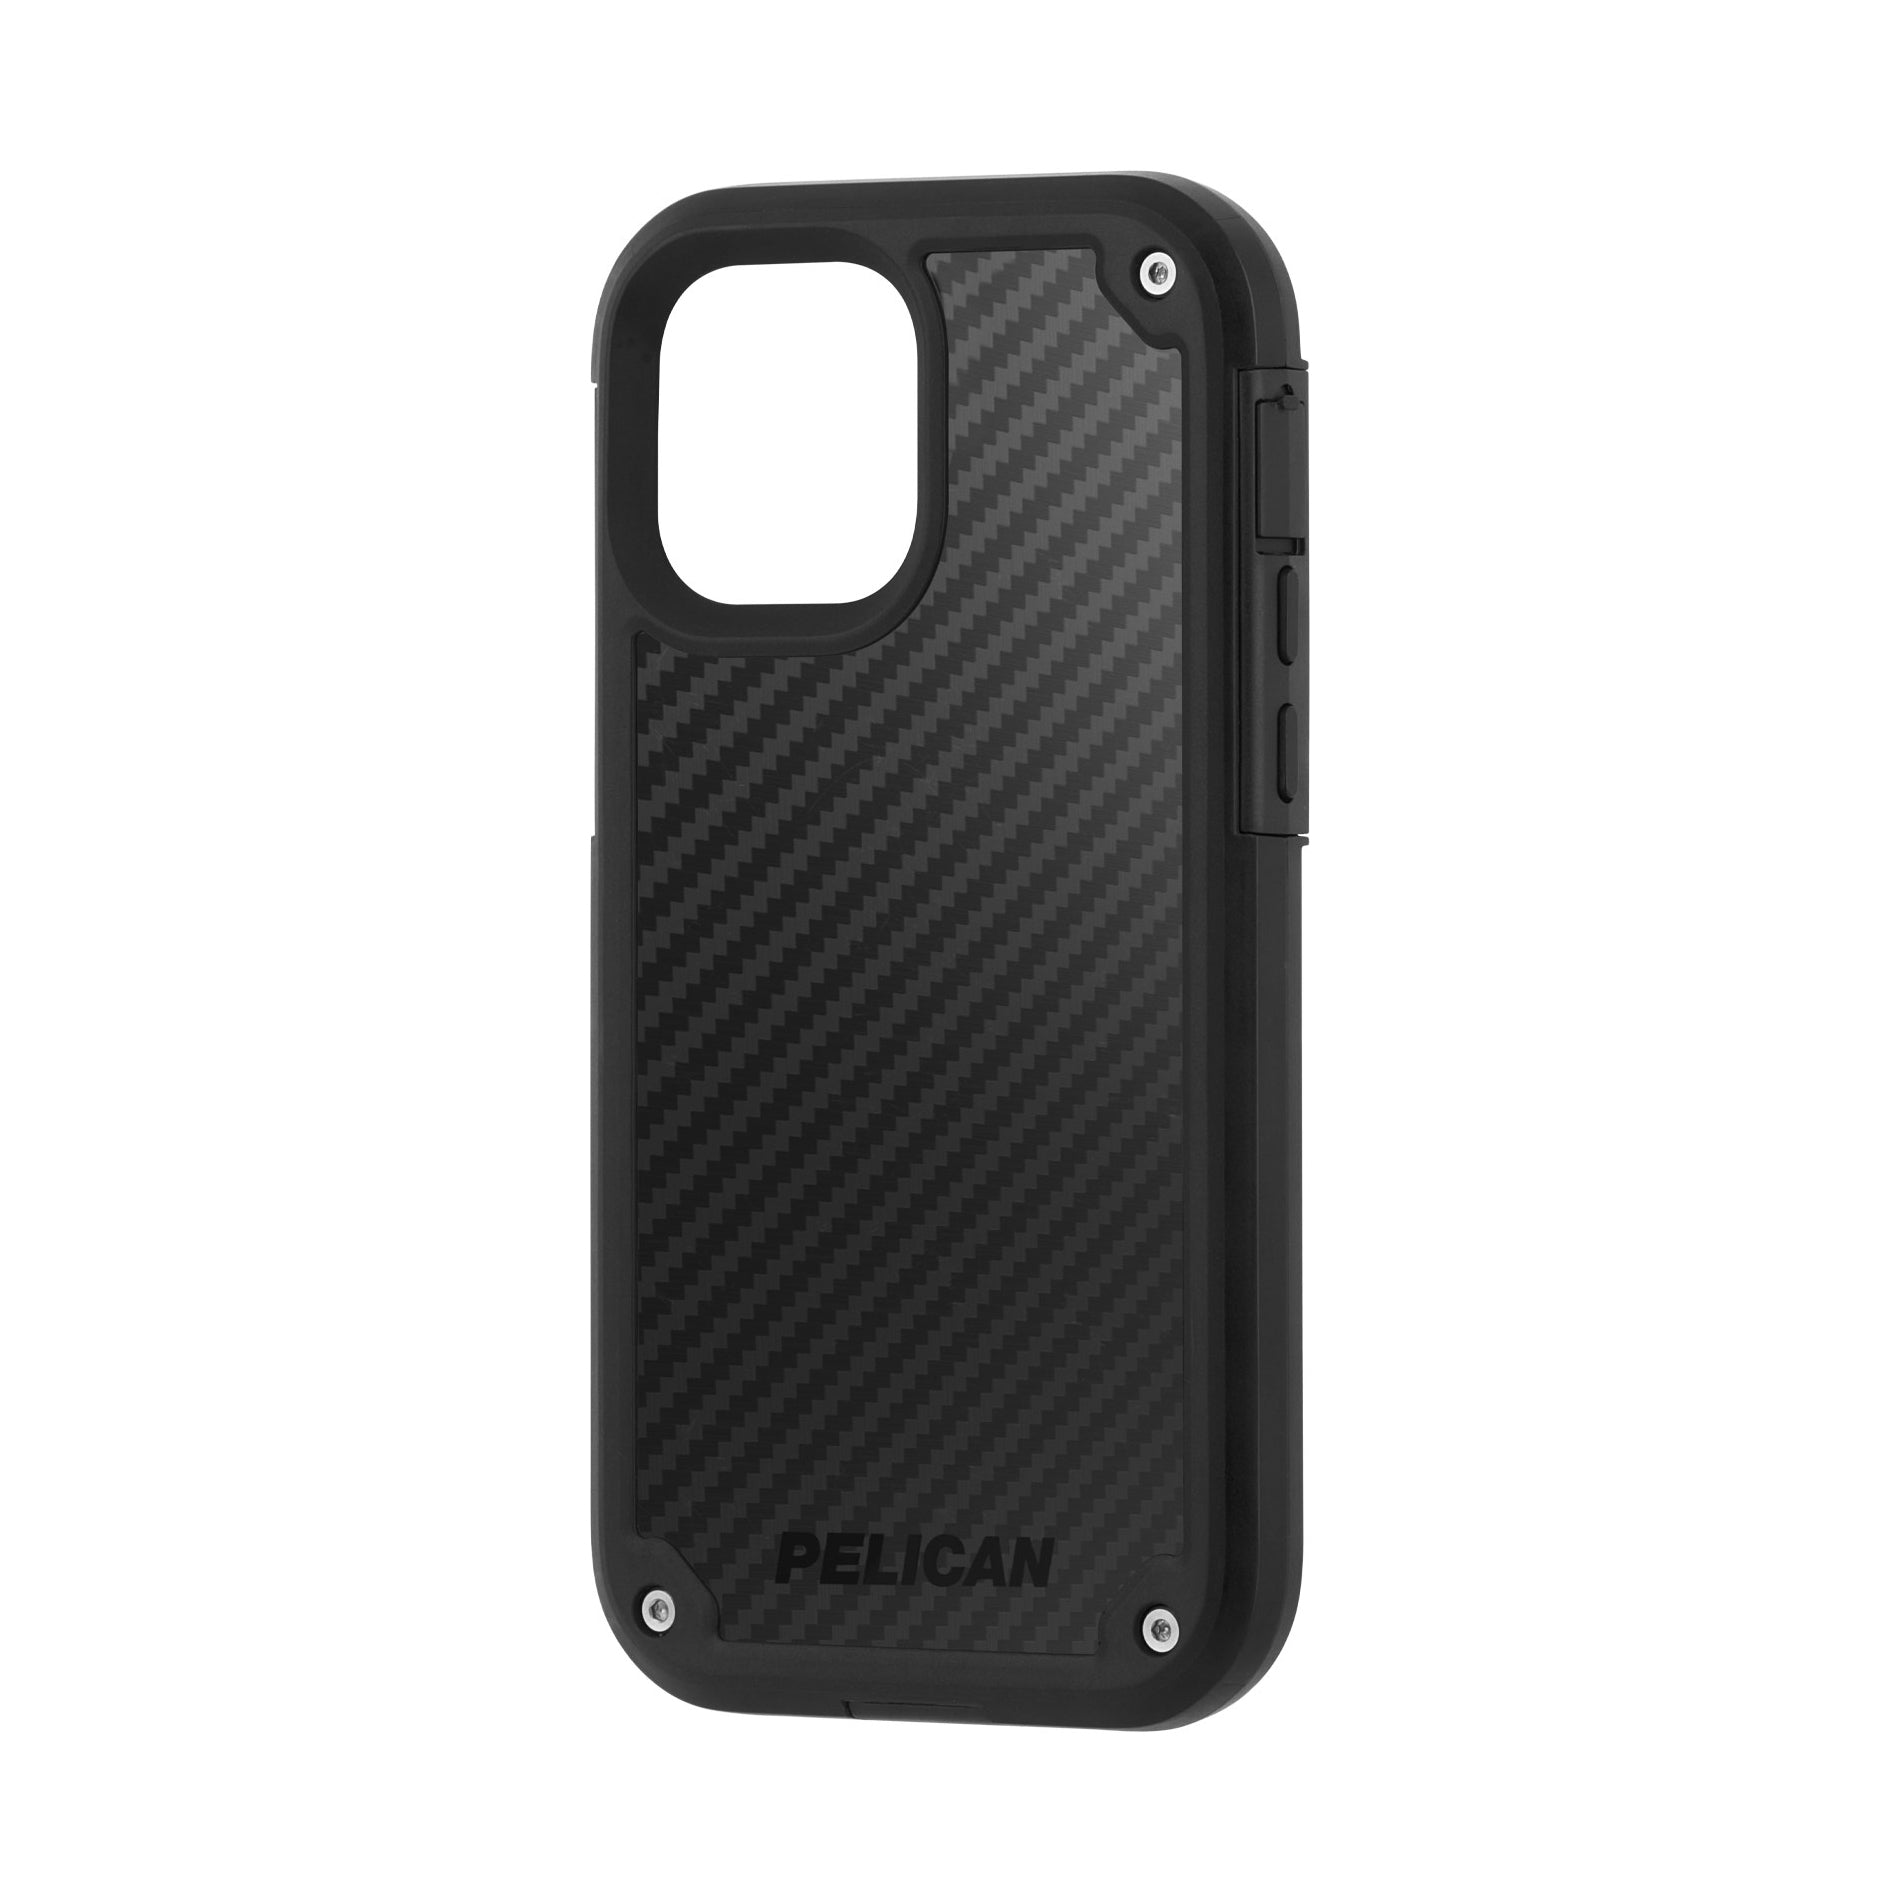 Pelican Shield Ultra Protective Case + Holster For iPhone iPhone 12 mini - Mac Addict